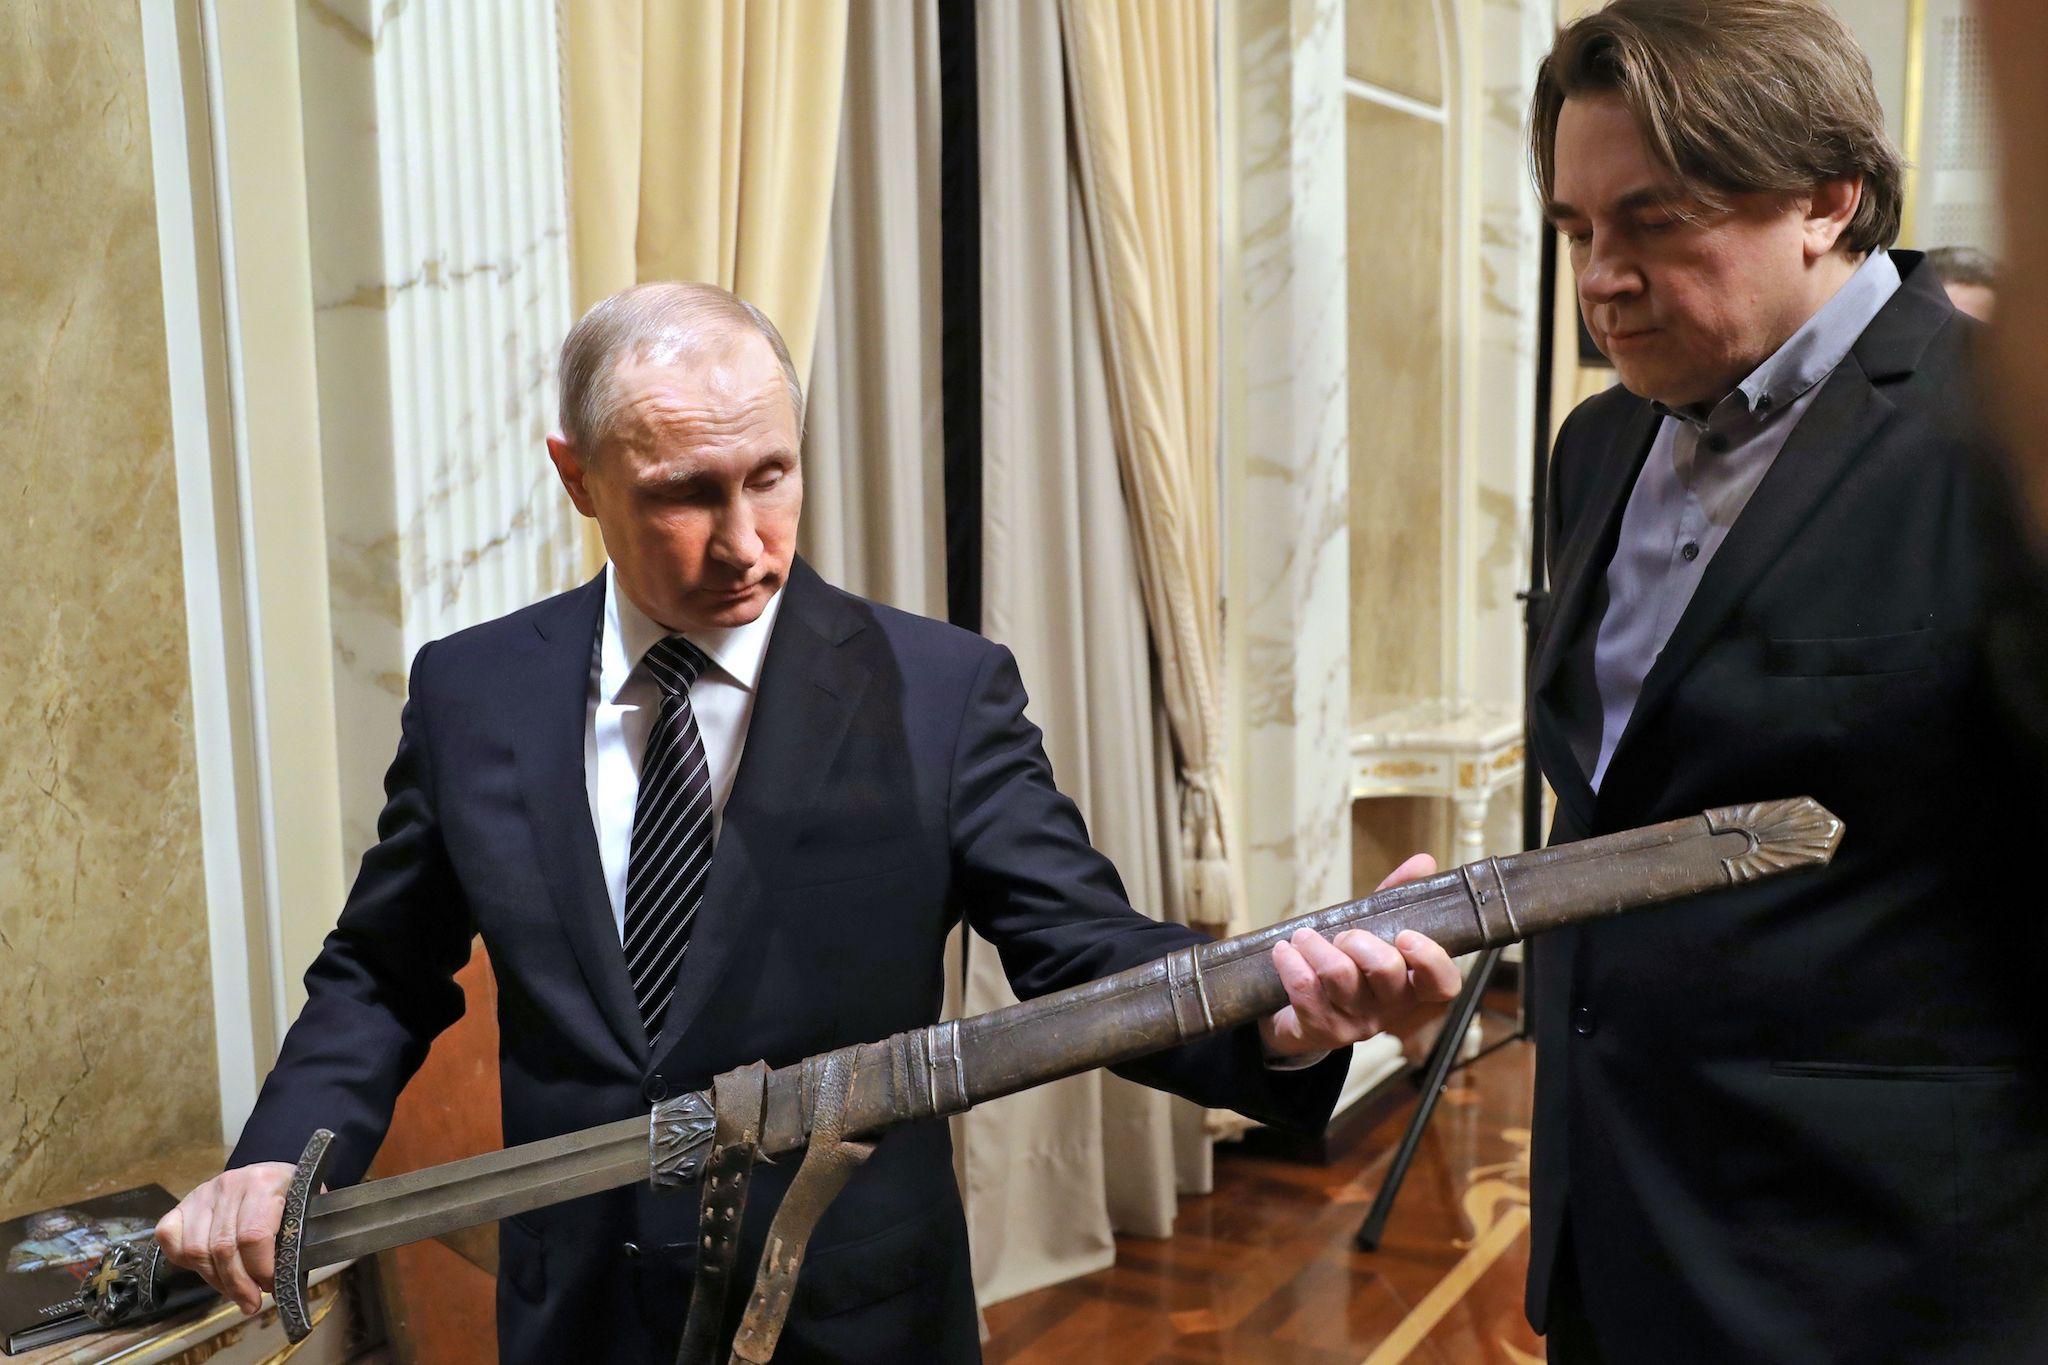 Russian President Vladimir Putin (L) holds a cinema replica of a sword as he speaks with film producer and Channel One CEO Konstantin Ernst during a meeting with the crew of The Viking film based on the Primary Chronicle, on December 30, 2016 in Moscow